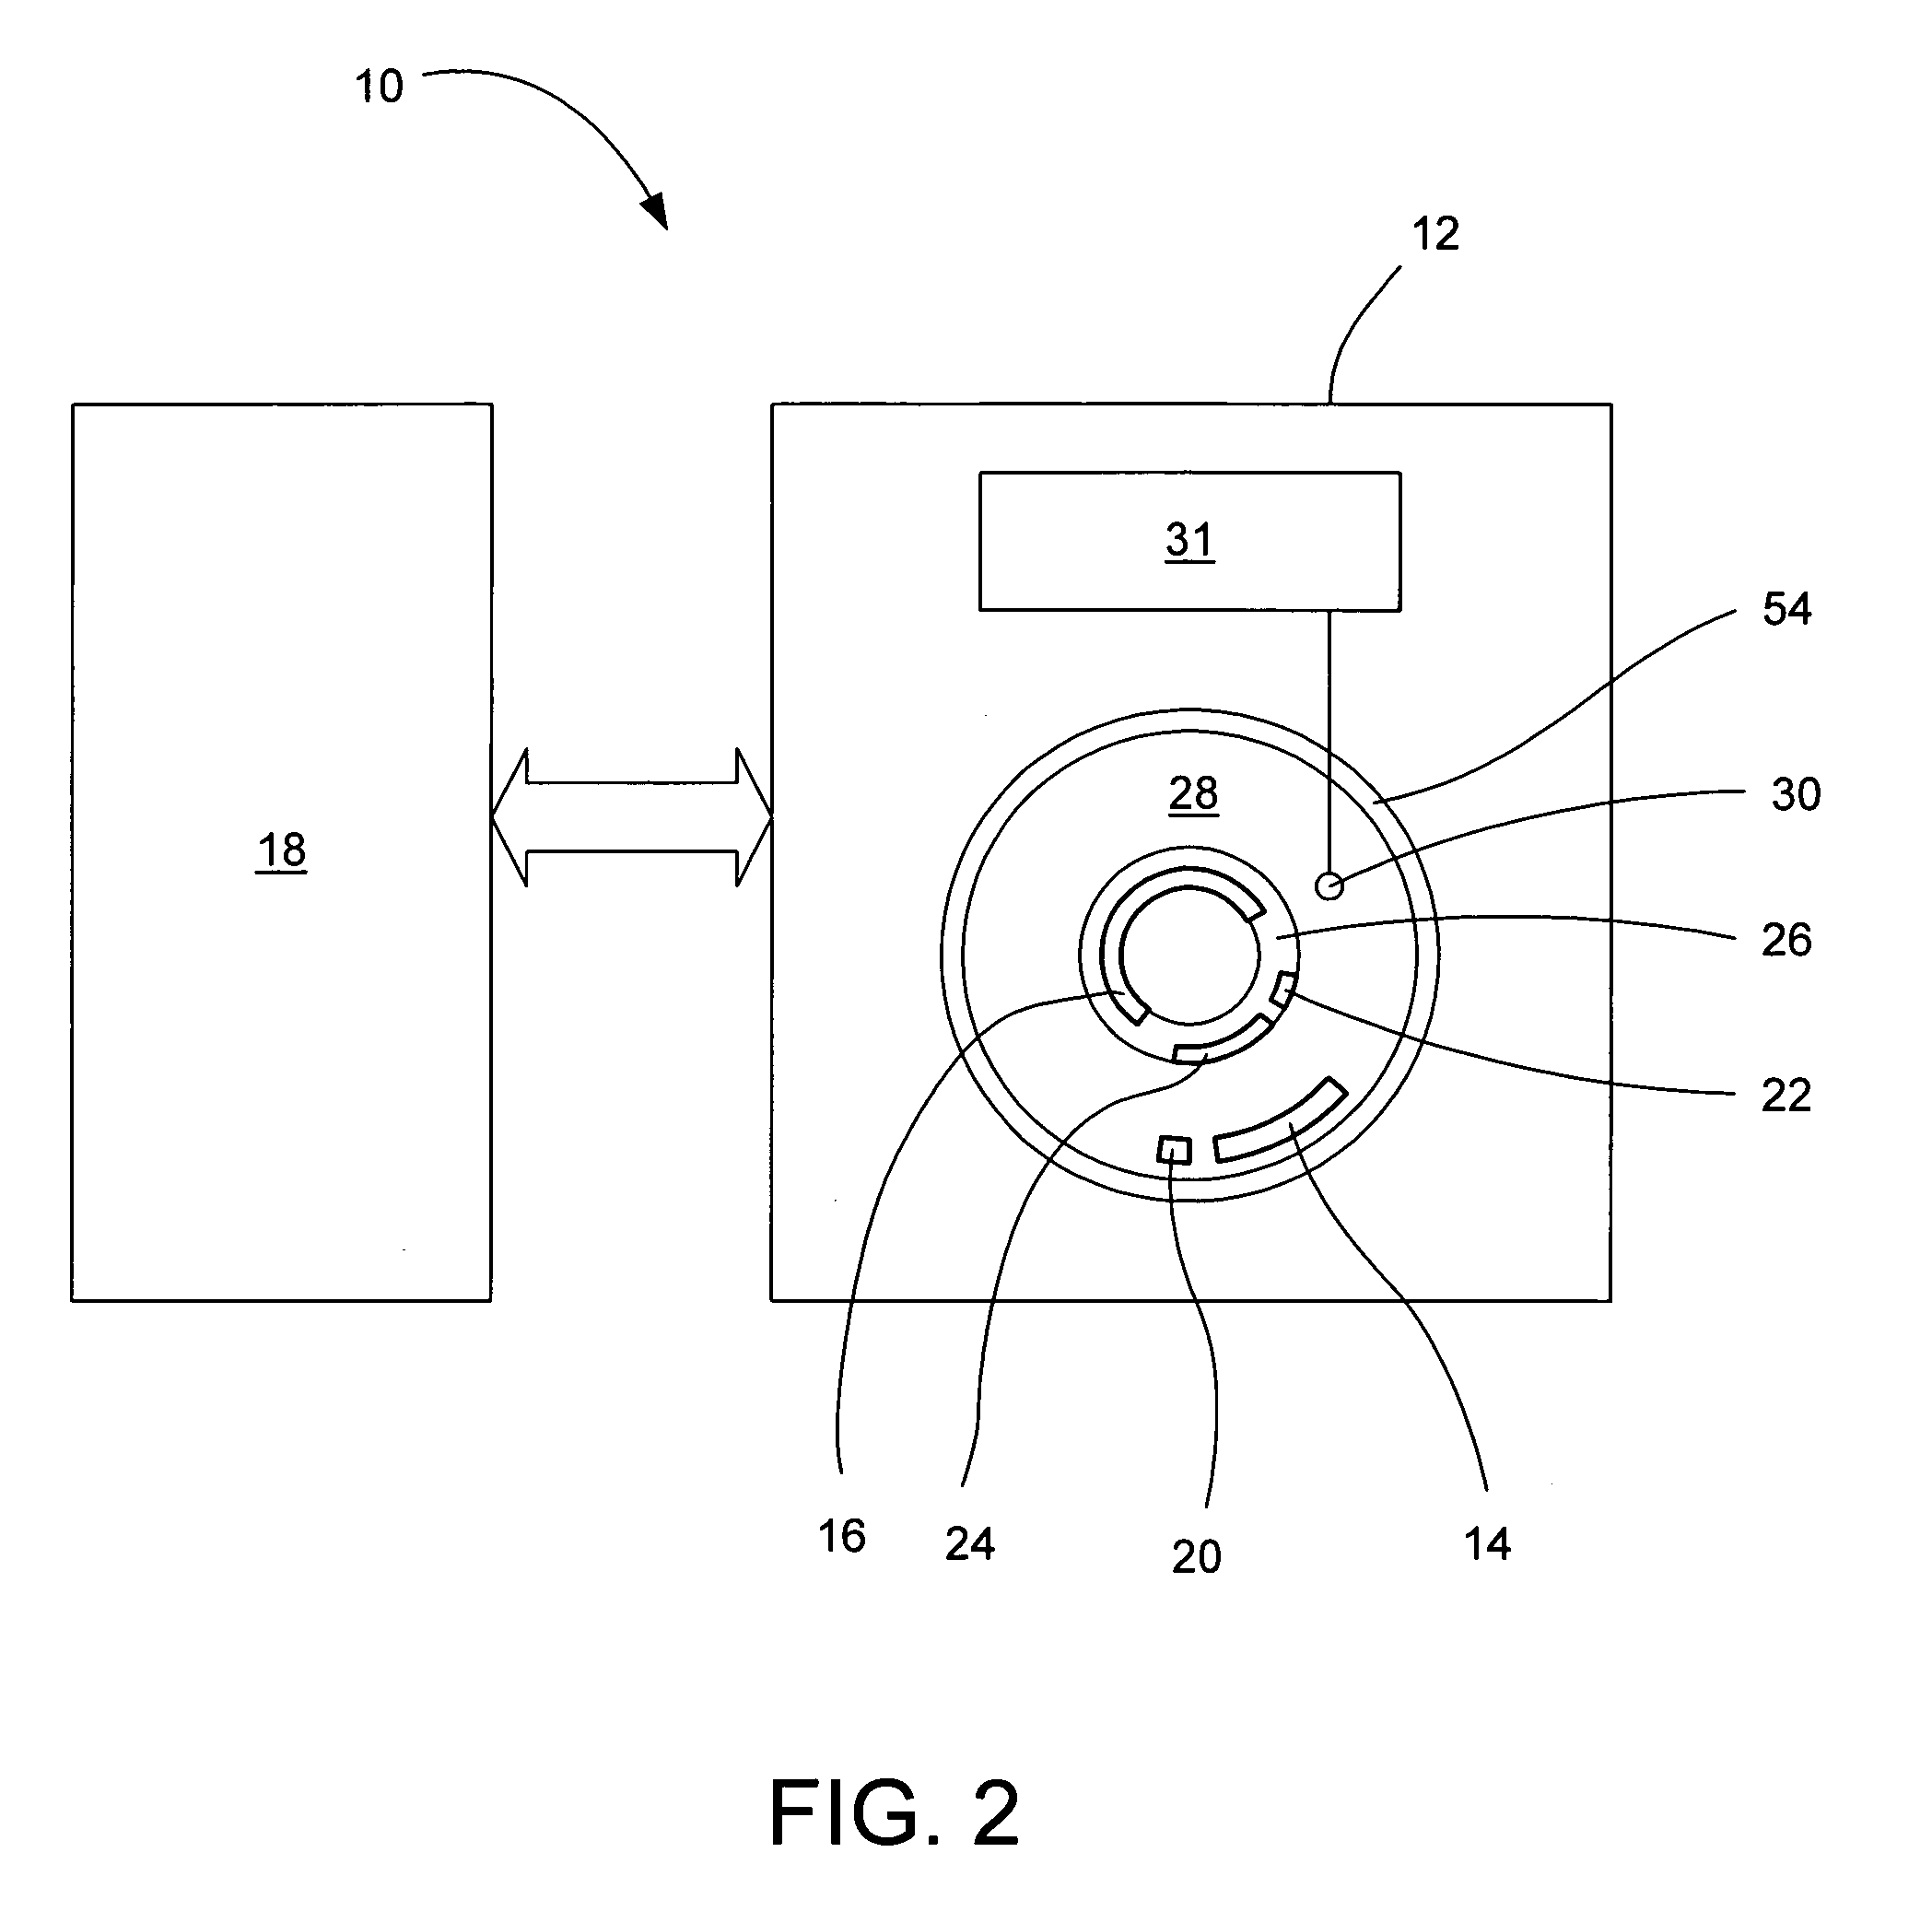 Method for installing an application program, to be executed during each bootload of a computer system for presenting a user with content options prior to conventional system startup presentation, without requiring a user's participation to install the program